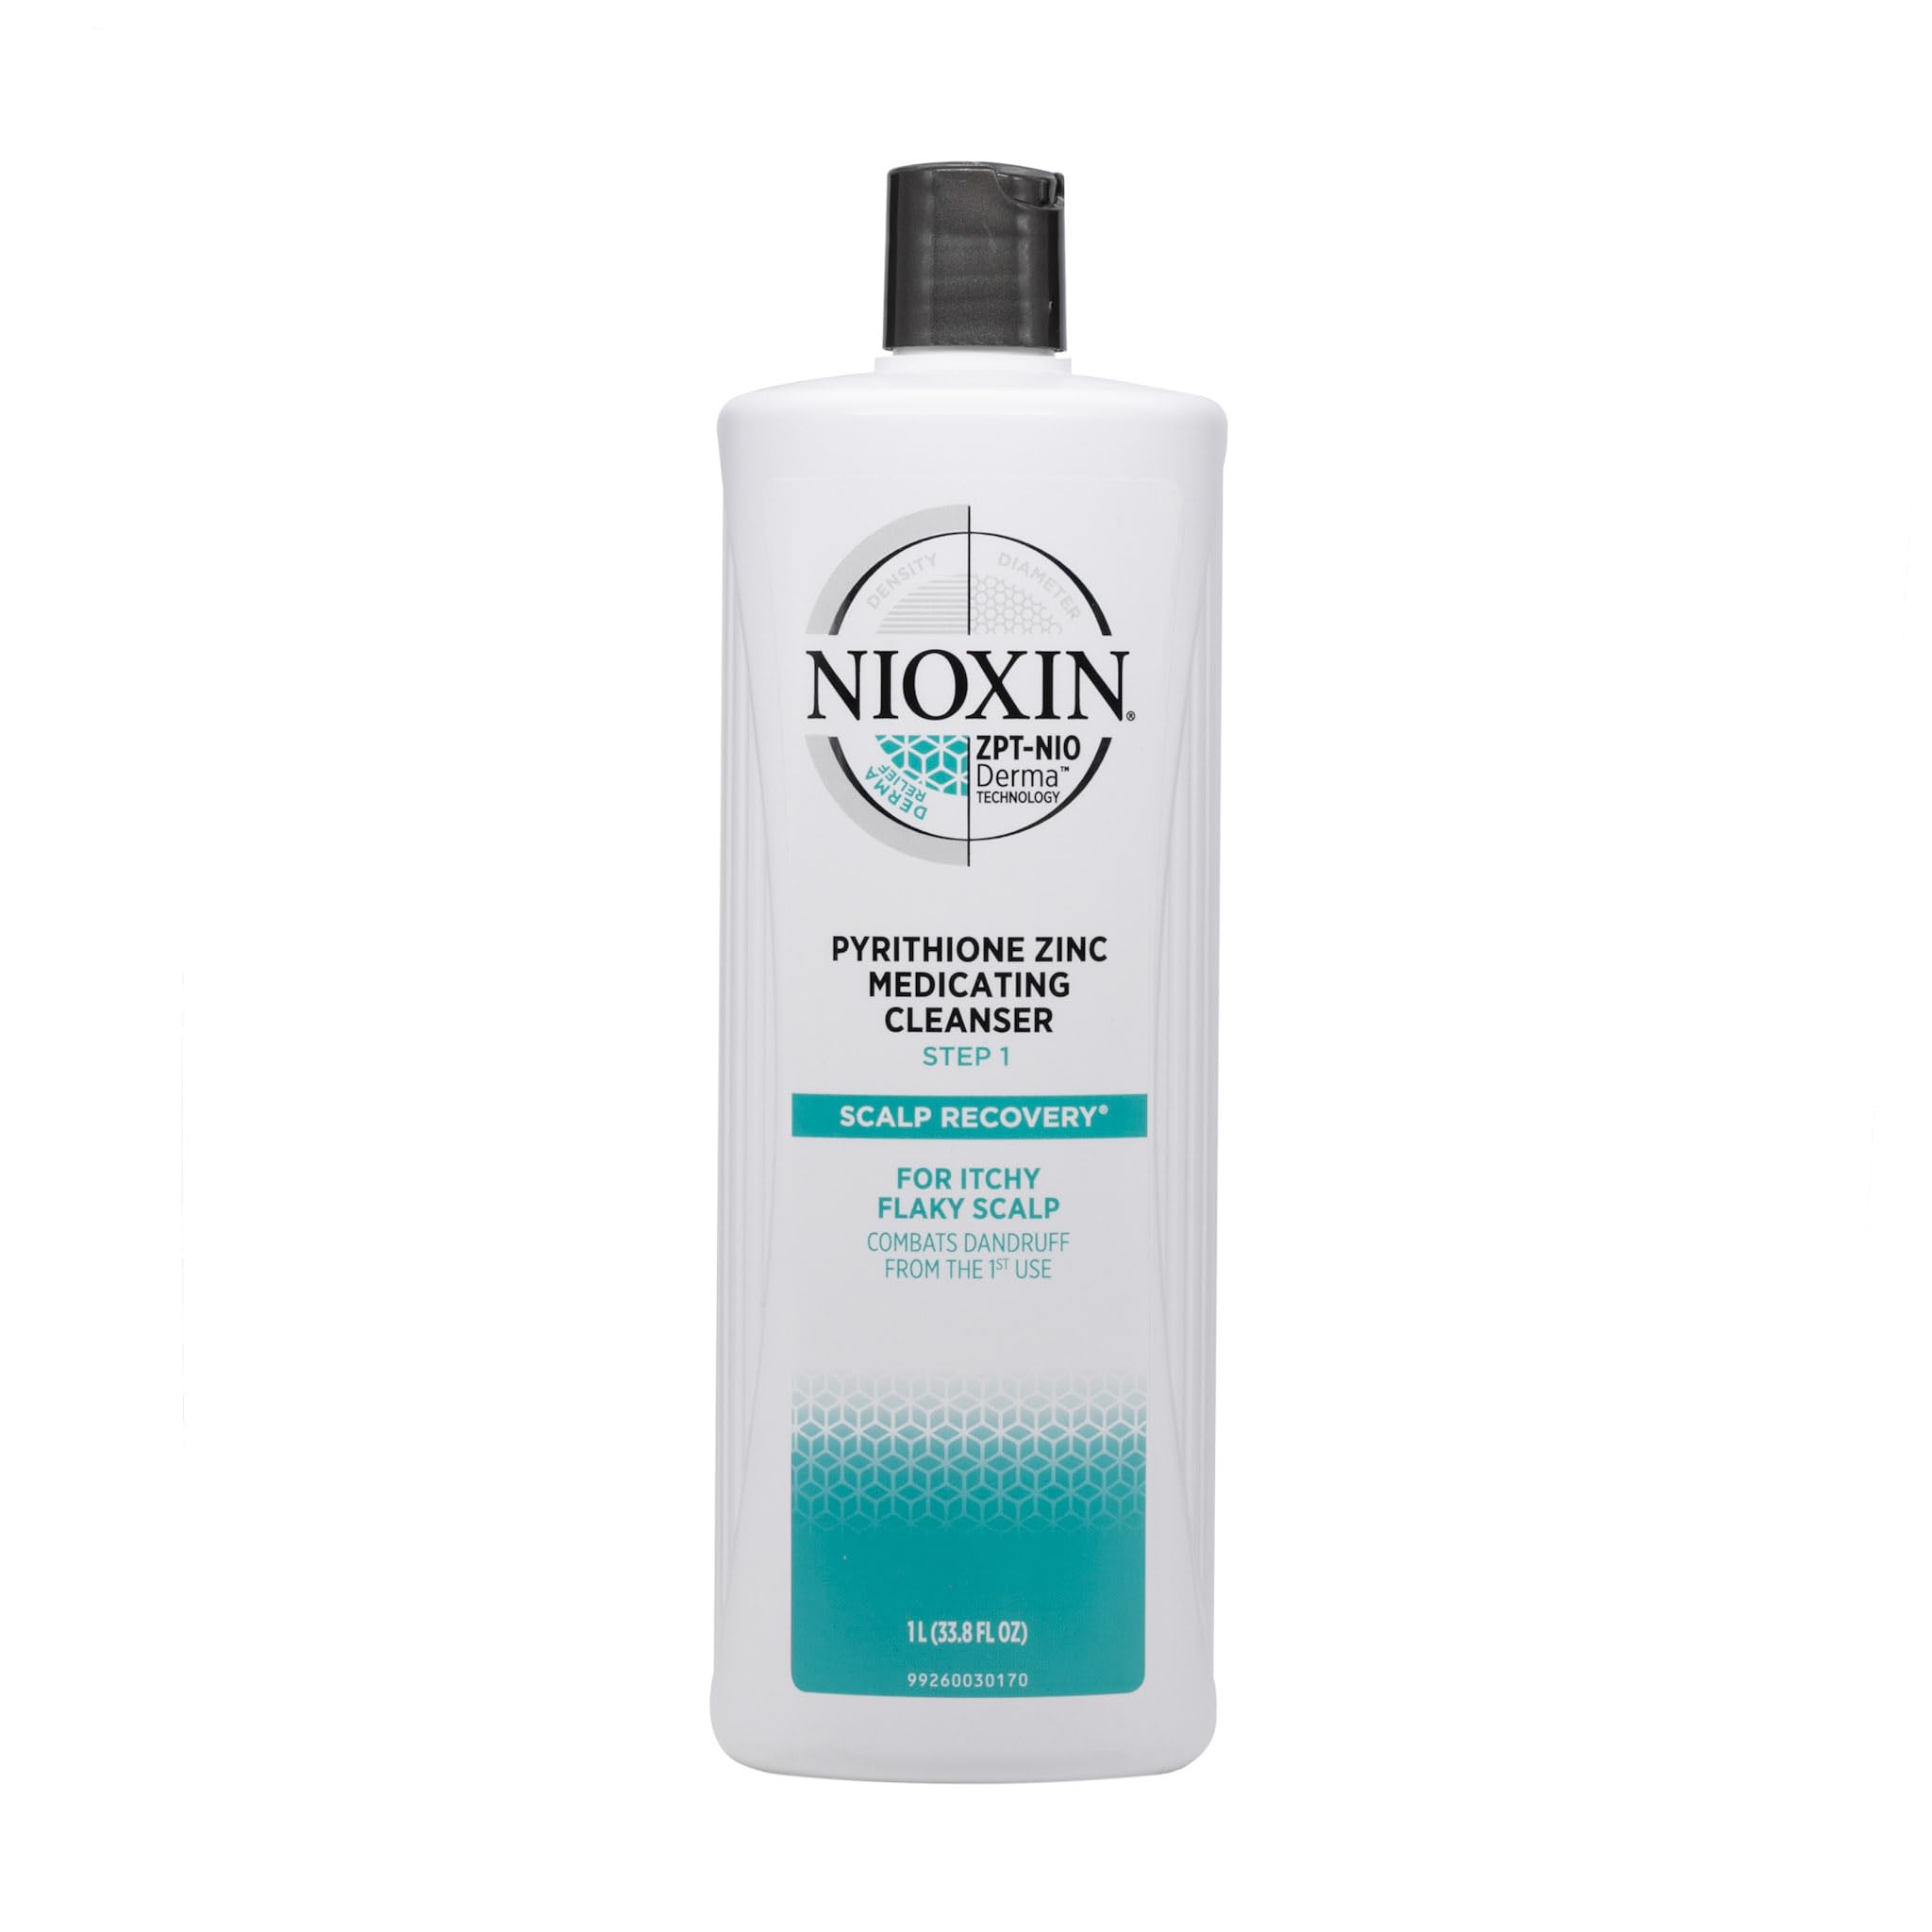 Nioxin Scalp Recovery Anti-Dandruff Cleanser Shampoo, With Pyrithione Zinc, For Itchy Scalp, 33.8 Fl Oz